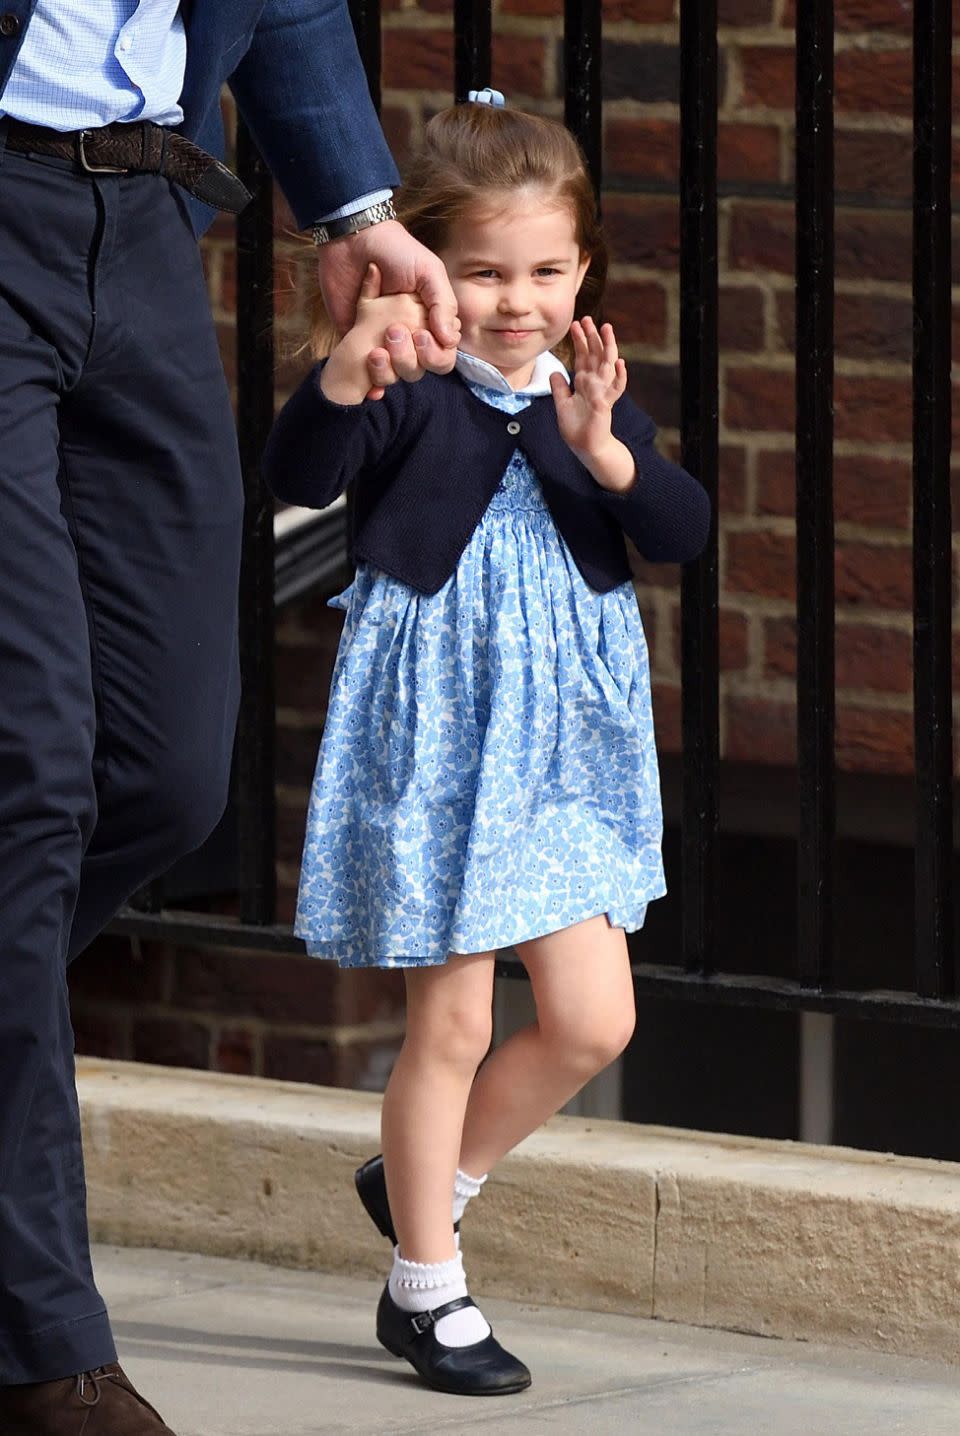 Princess Charlotte's adorable wave has seen hearts melt around the world. Photo: Getty